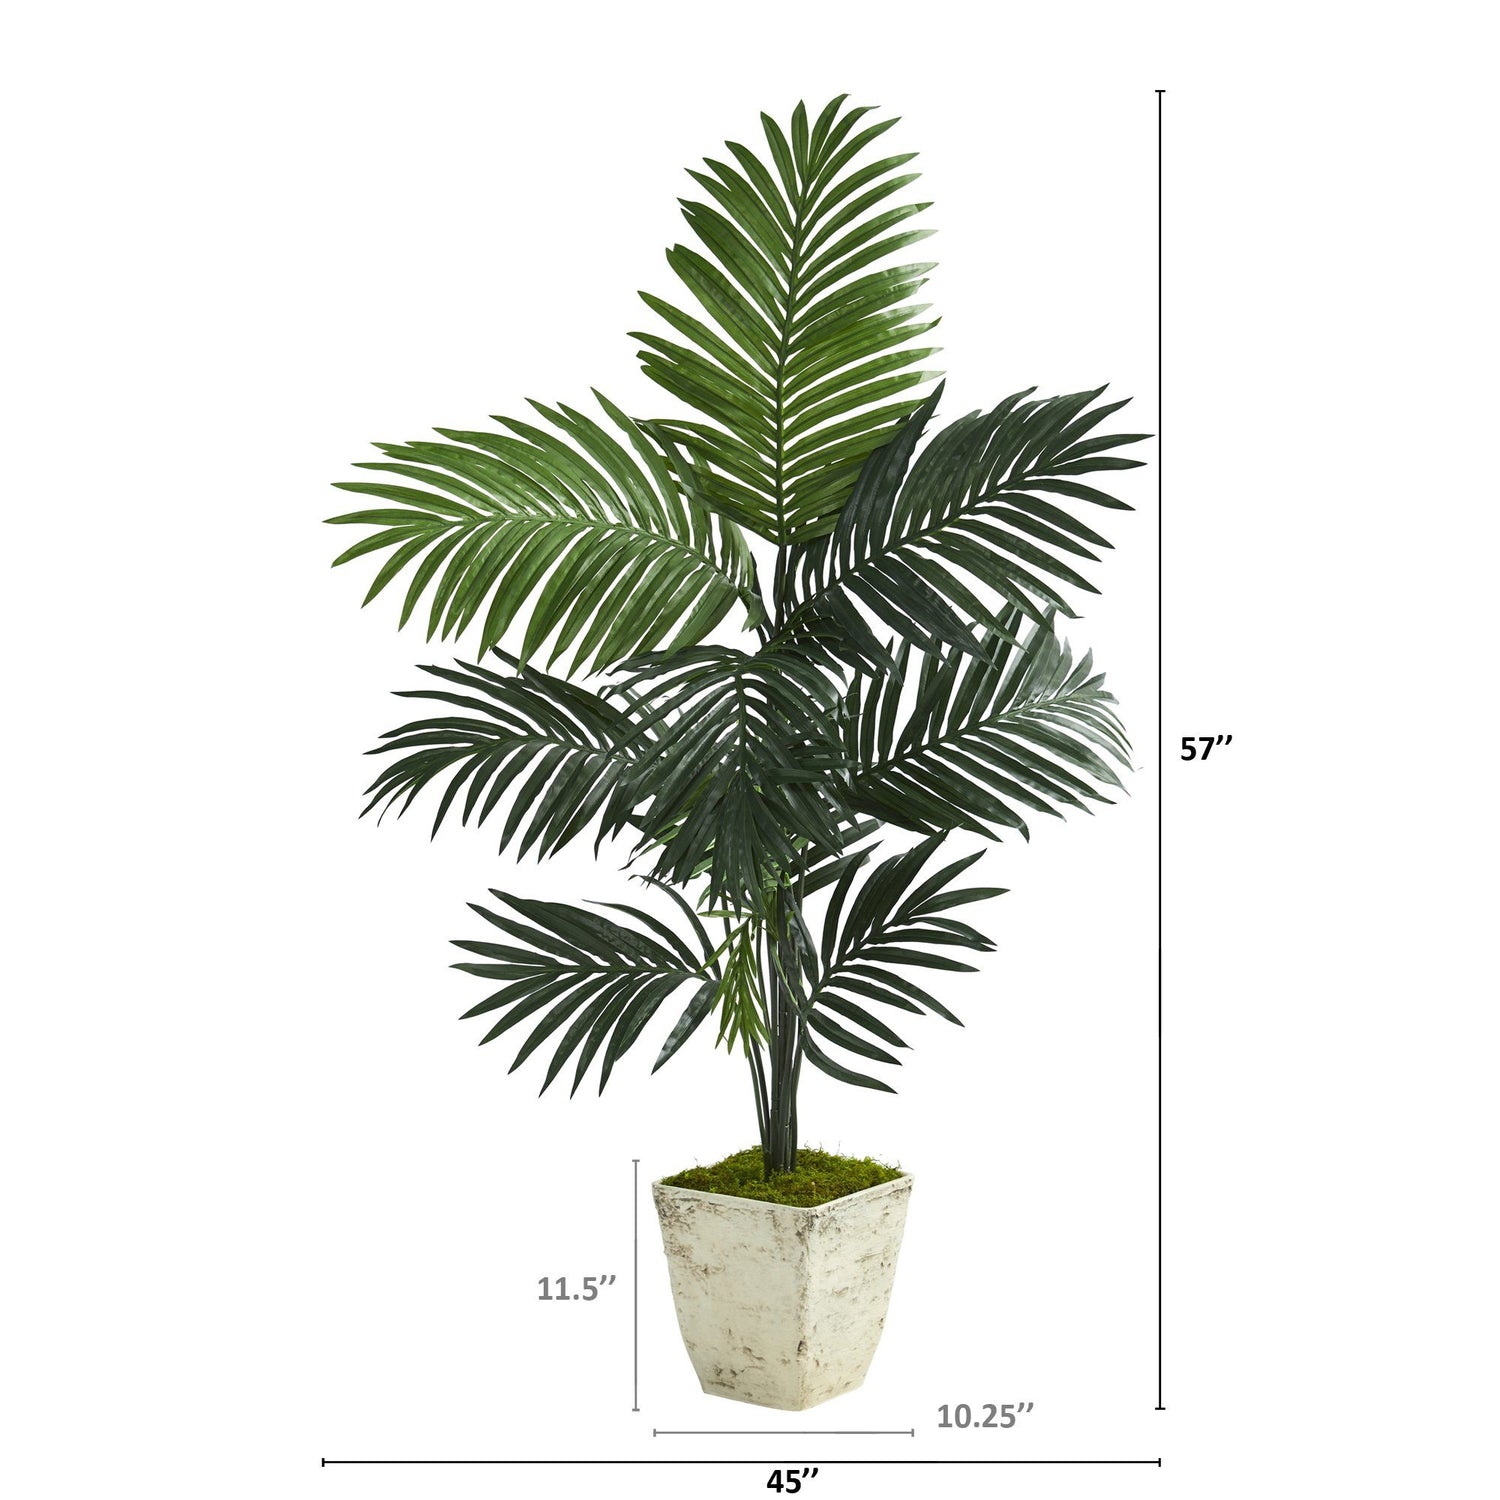 57” Kentia Artificial Palm Tree in Country White Planter